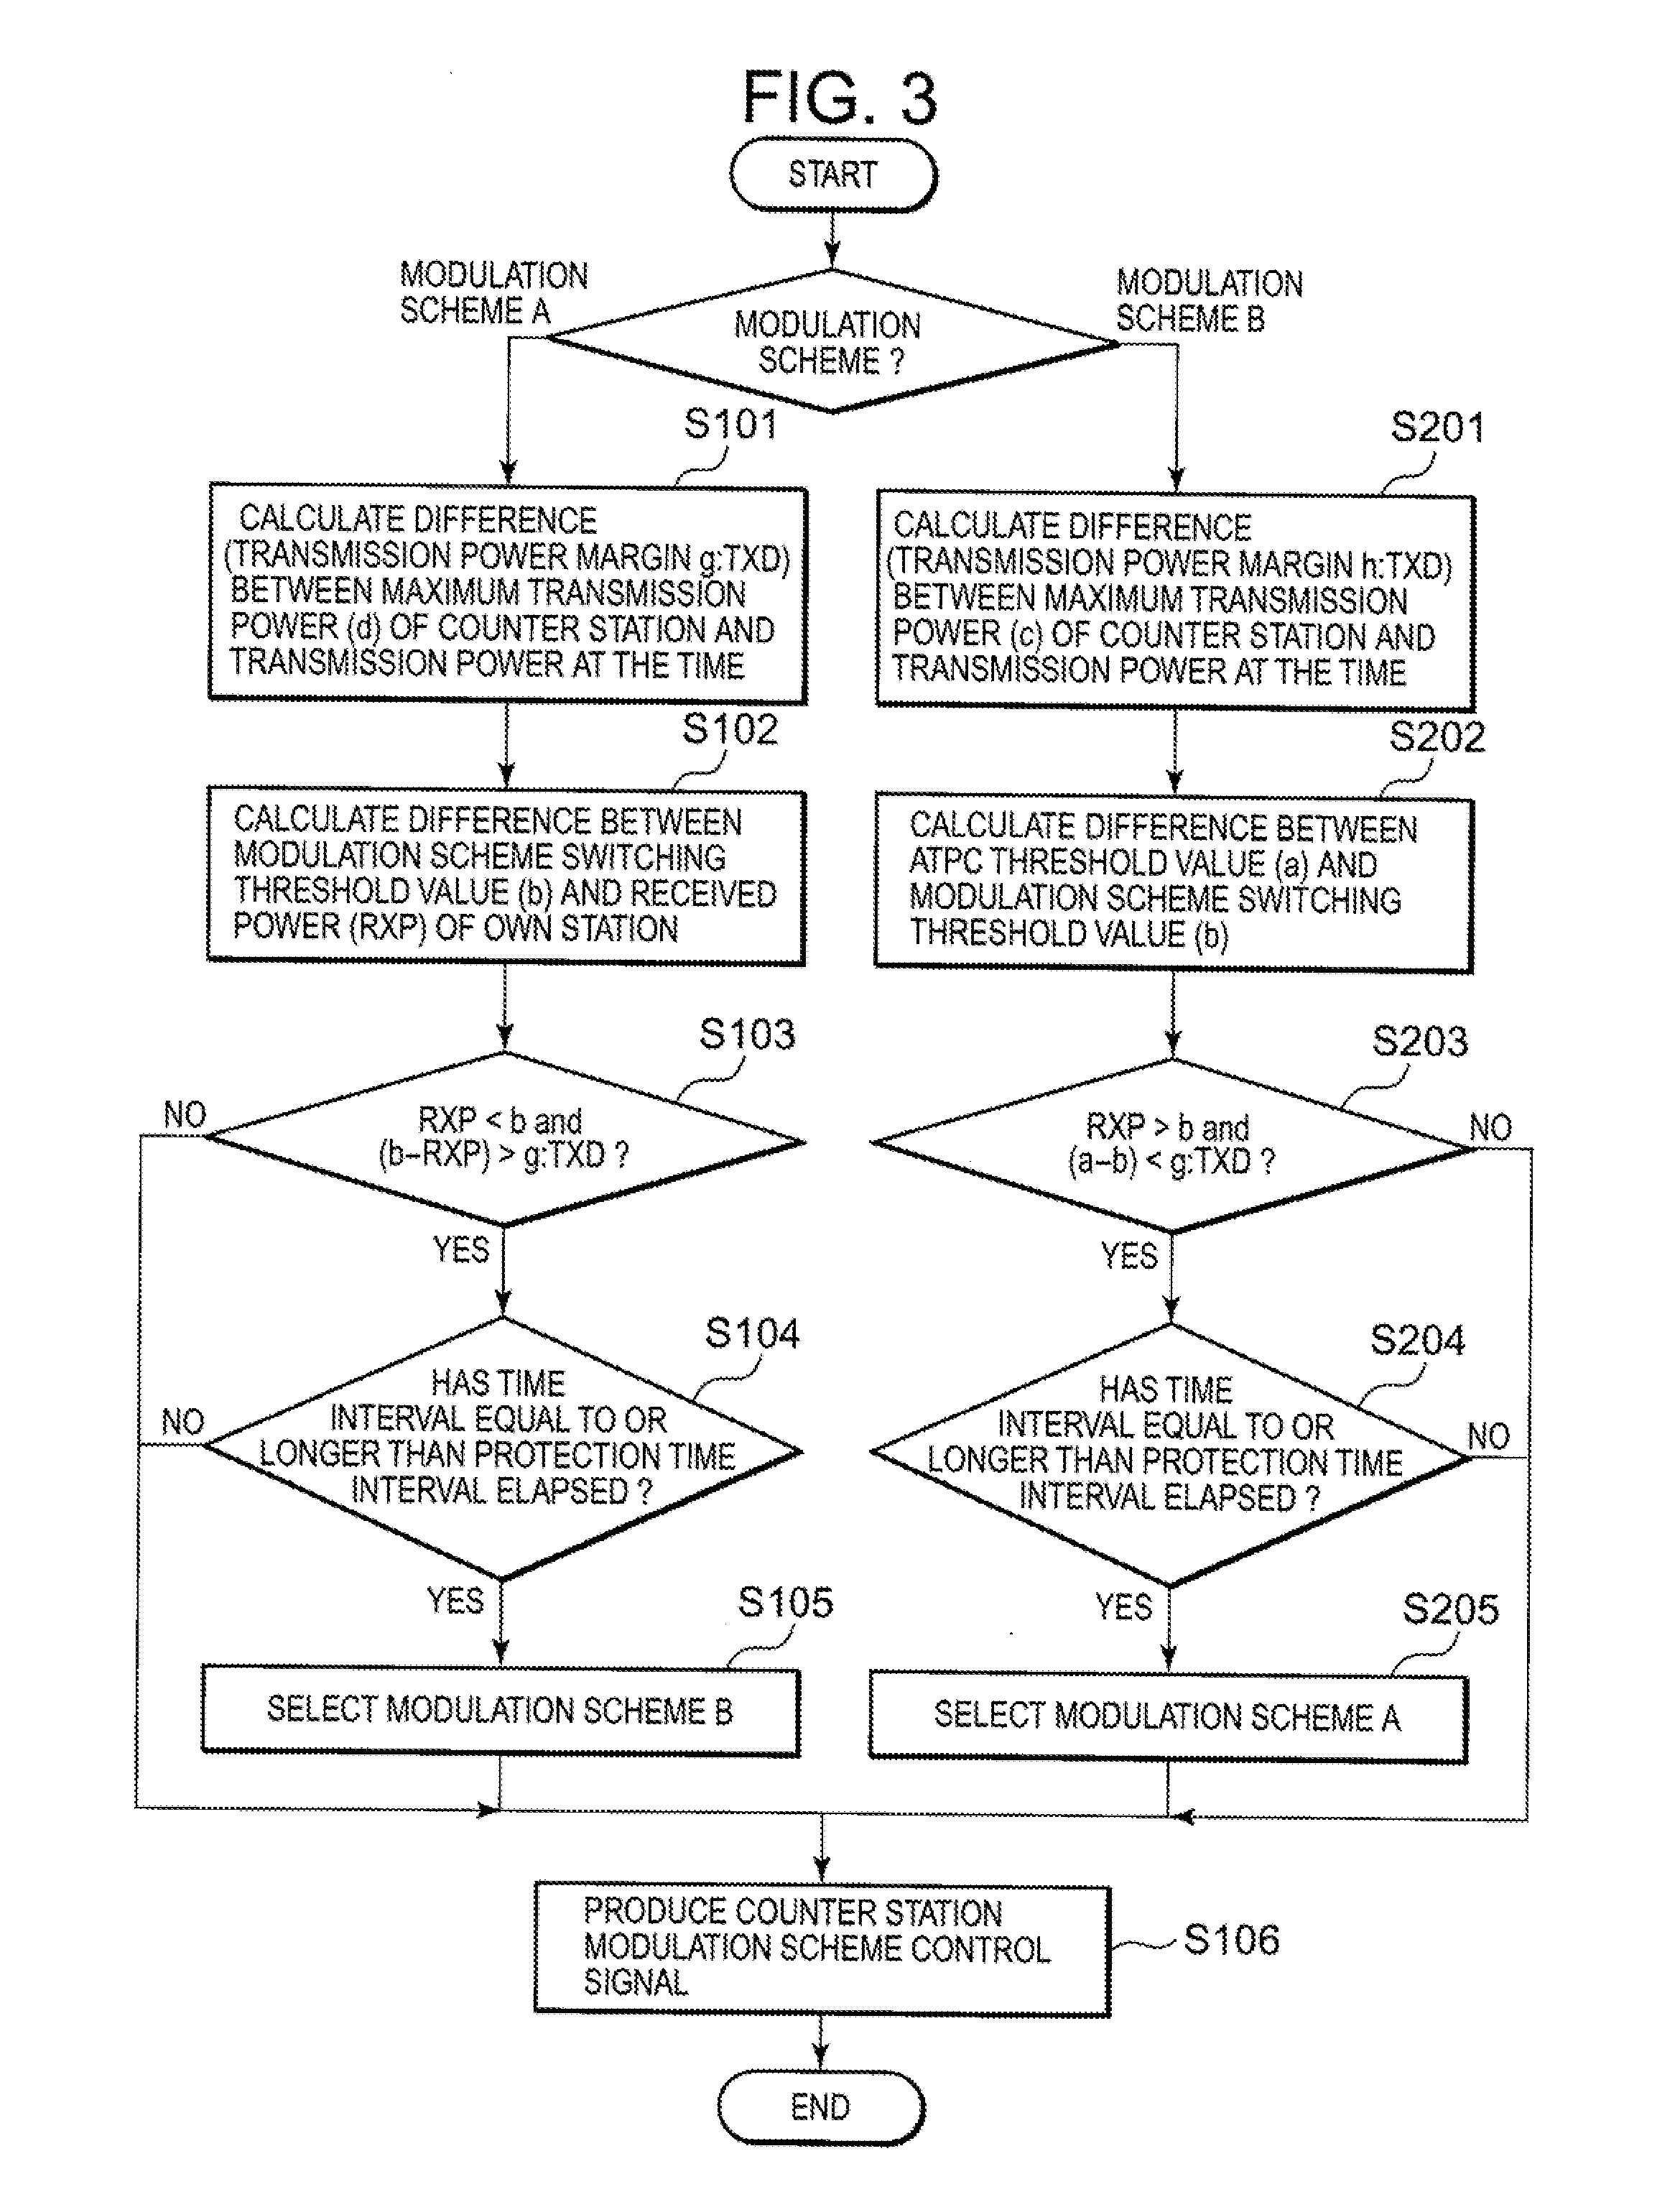 Radio transmission device, method for determining modulation system, and recording medium therefor